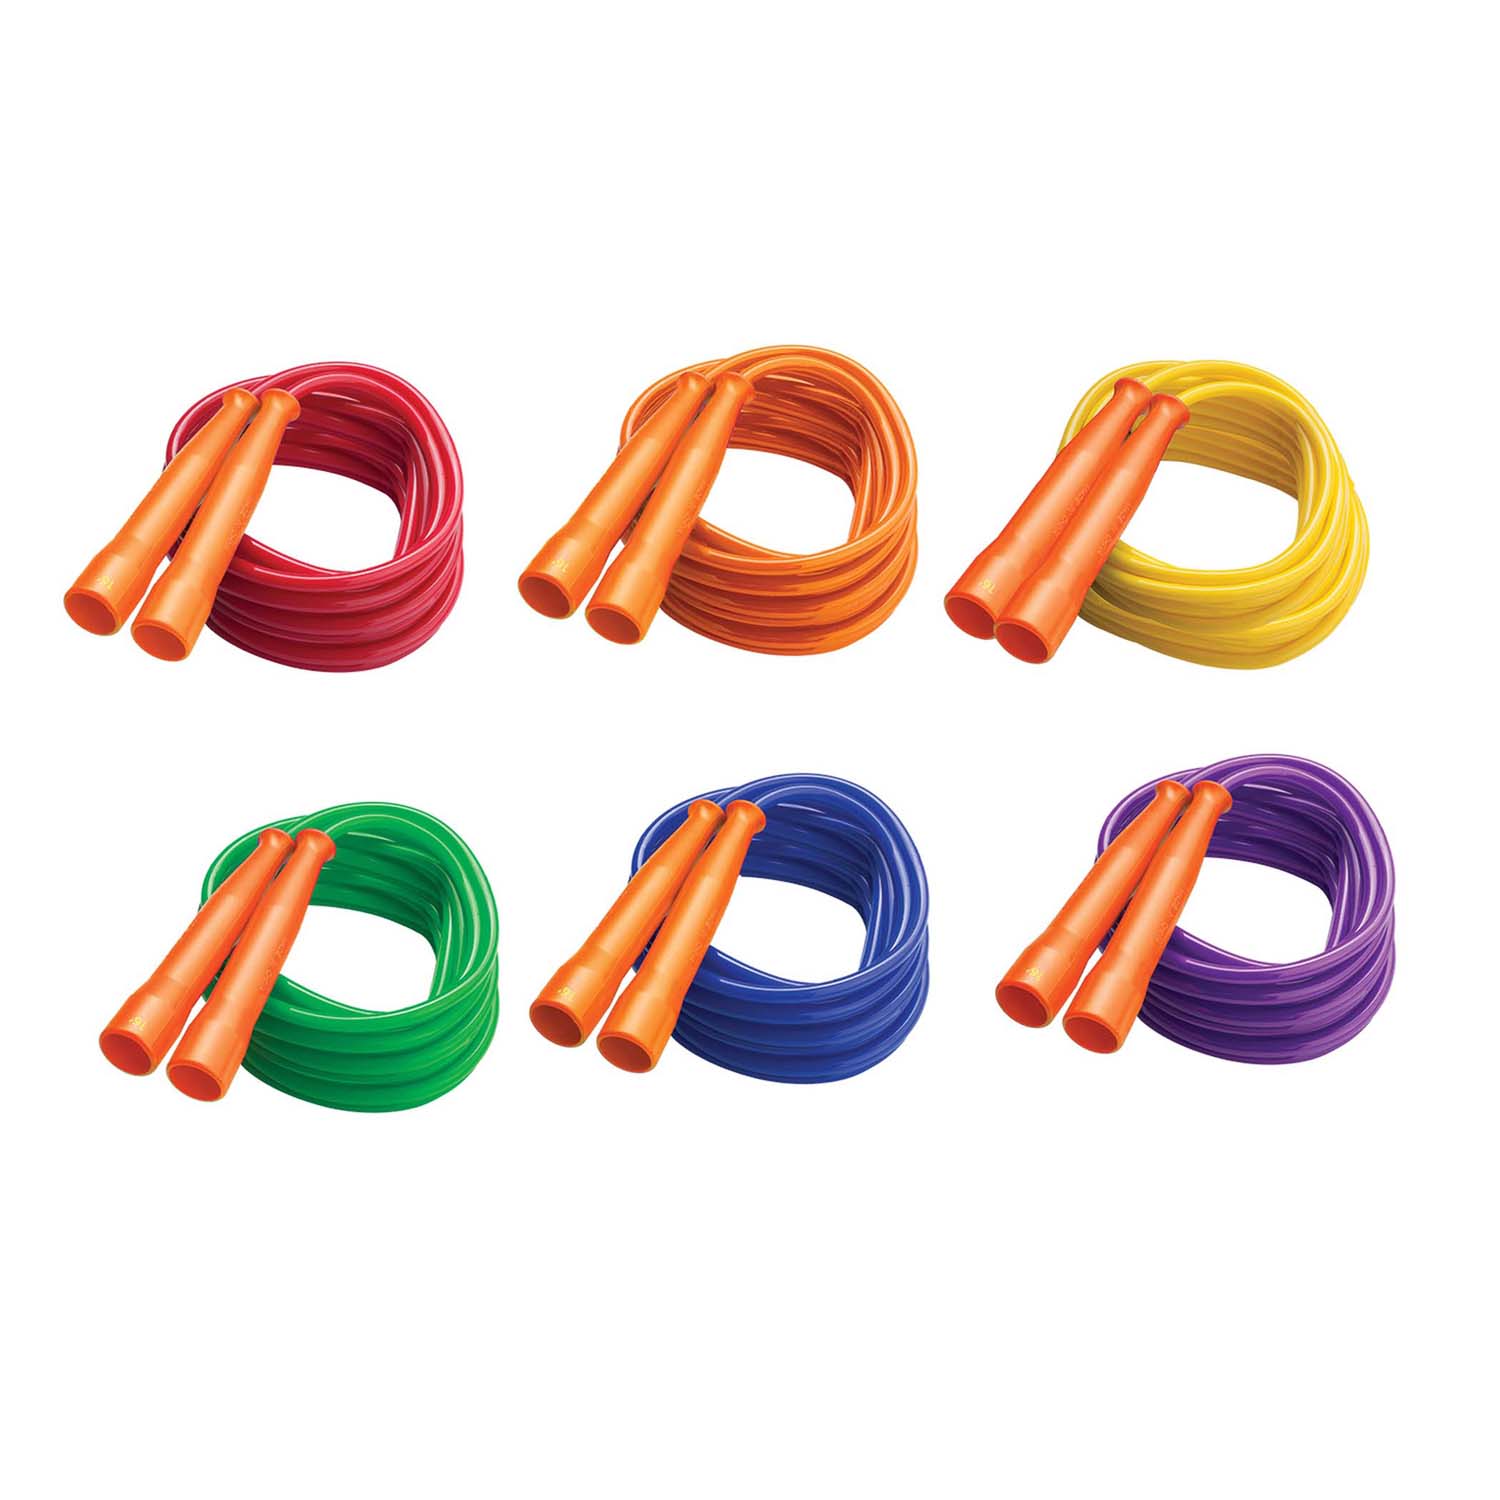 Licorice Speed Jump Rope, 16' with Orange Handles, Pack of 6